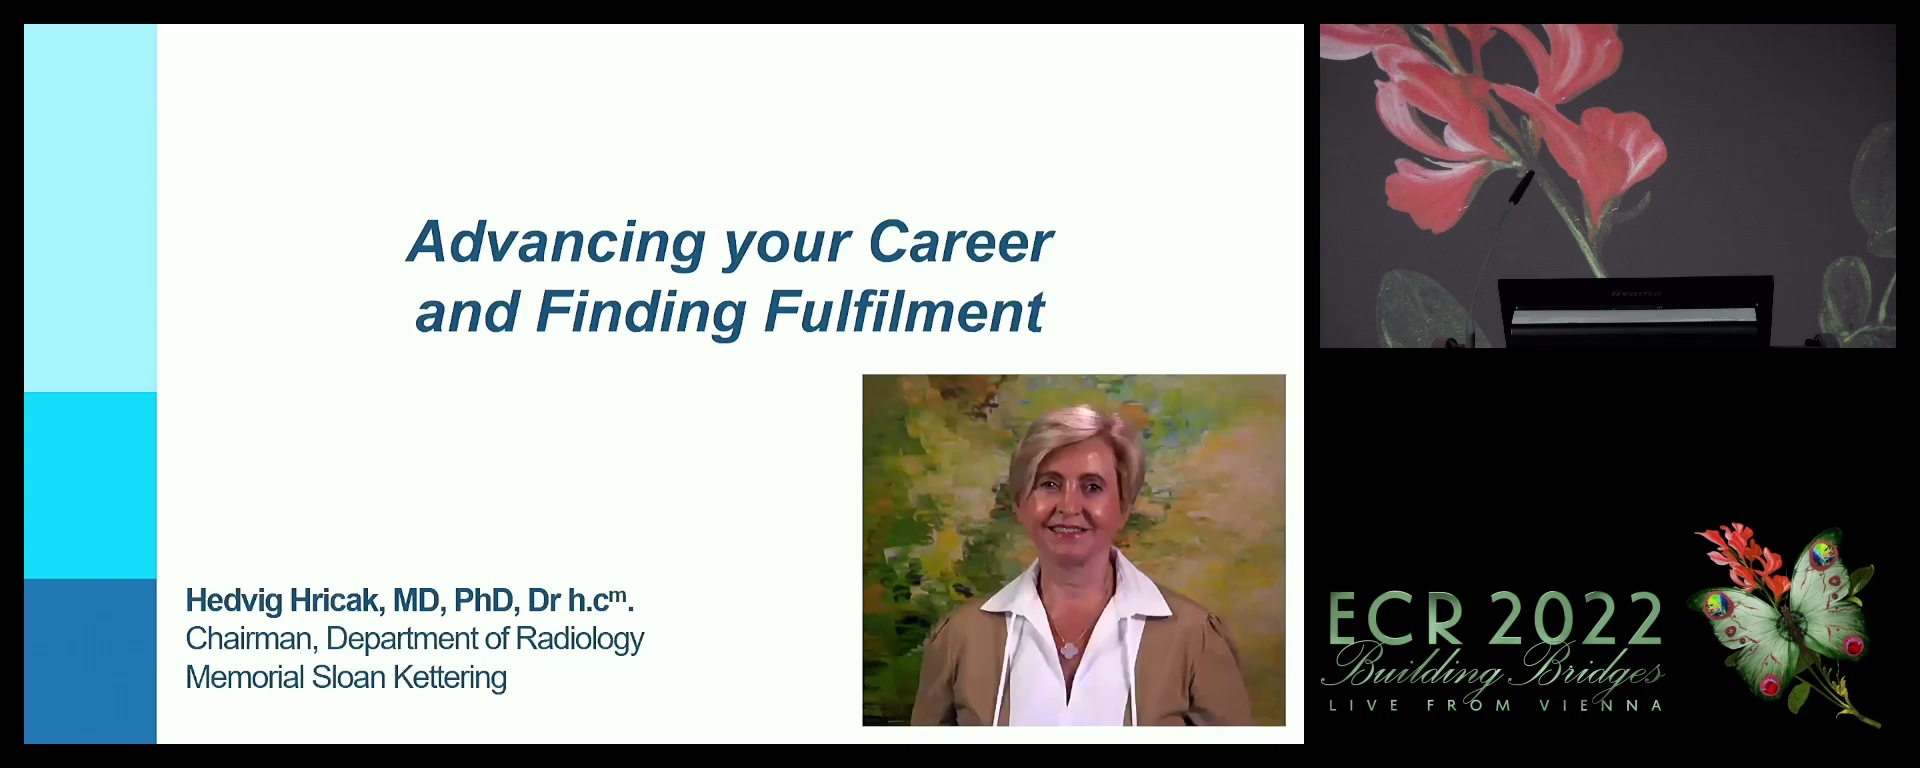 Advancing your career and finding fulfillment